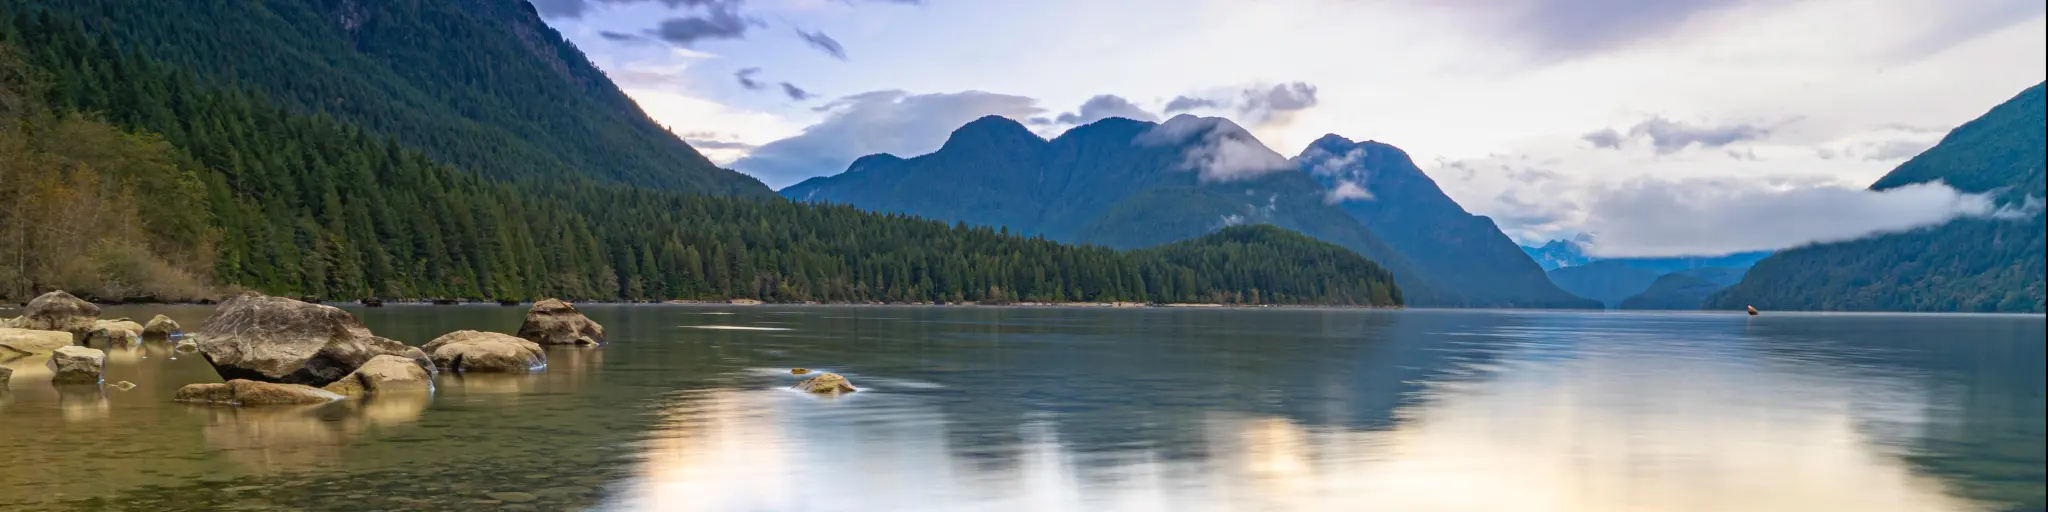 Golden Ears Provincial Park, BC, Canada with Alouette Lake in the foreground and the mountains in the distance reflecting in the calm water at sunrise. 